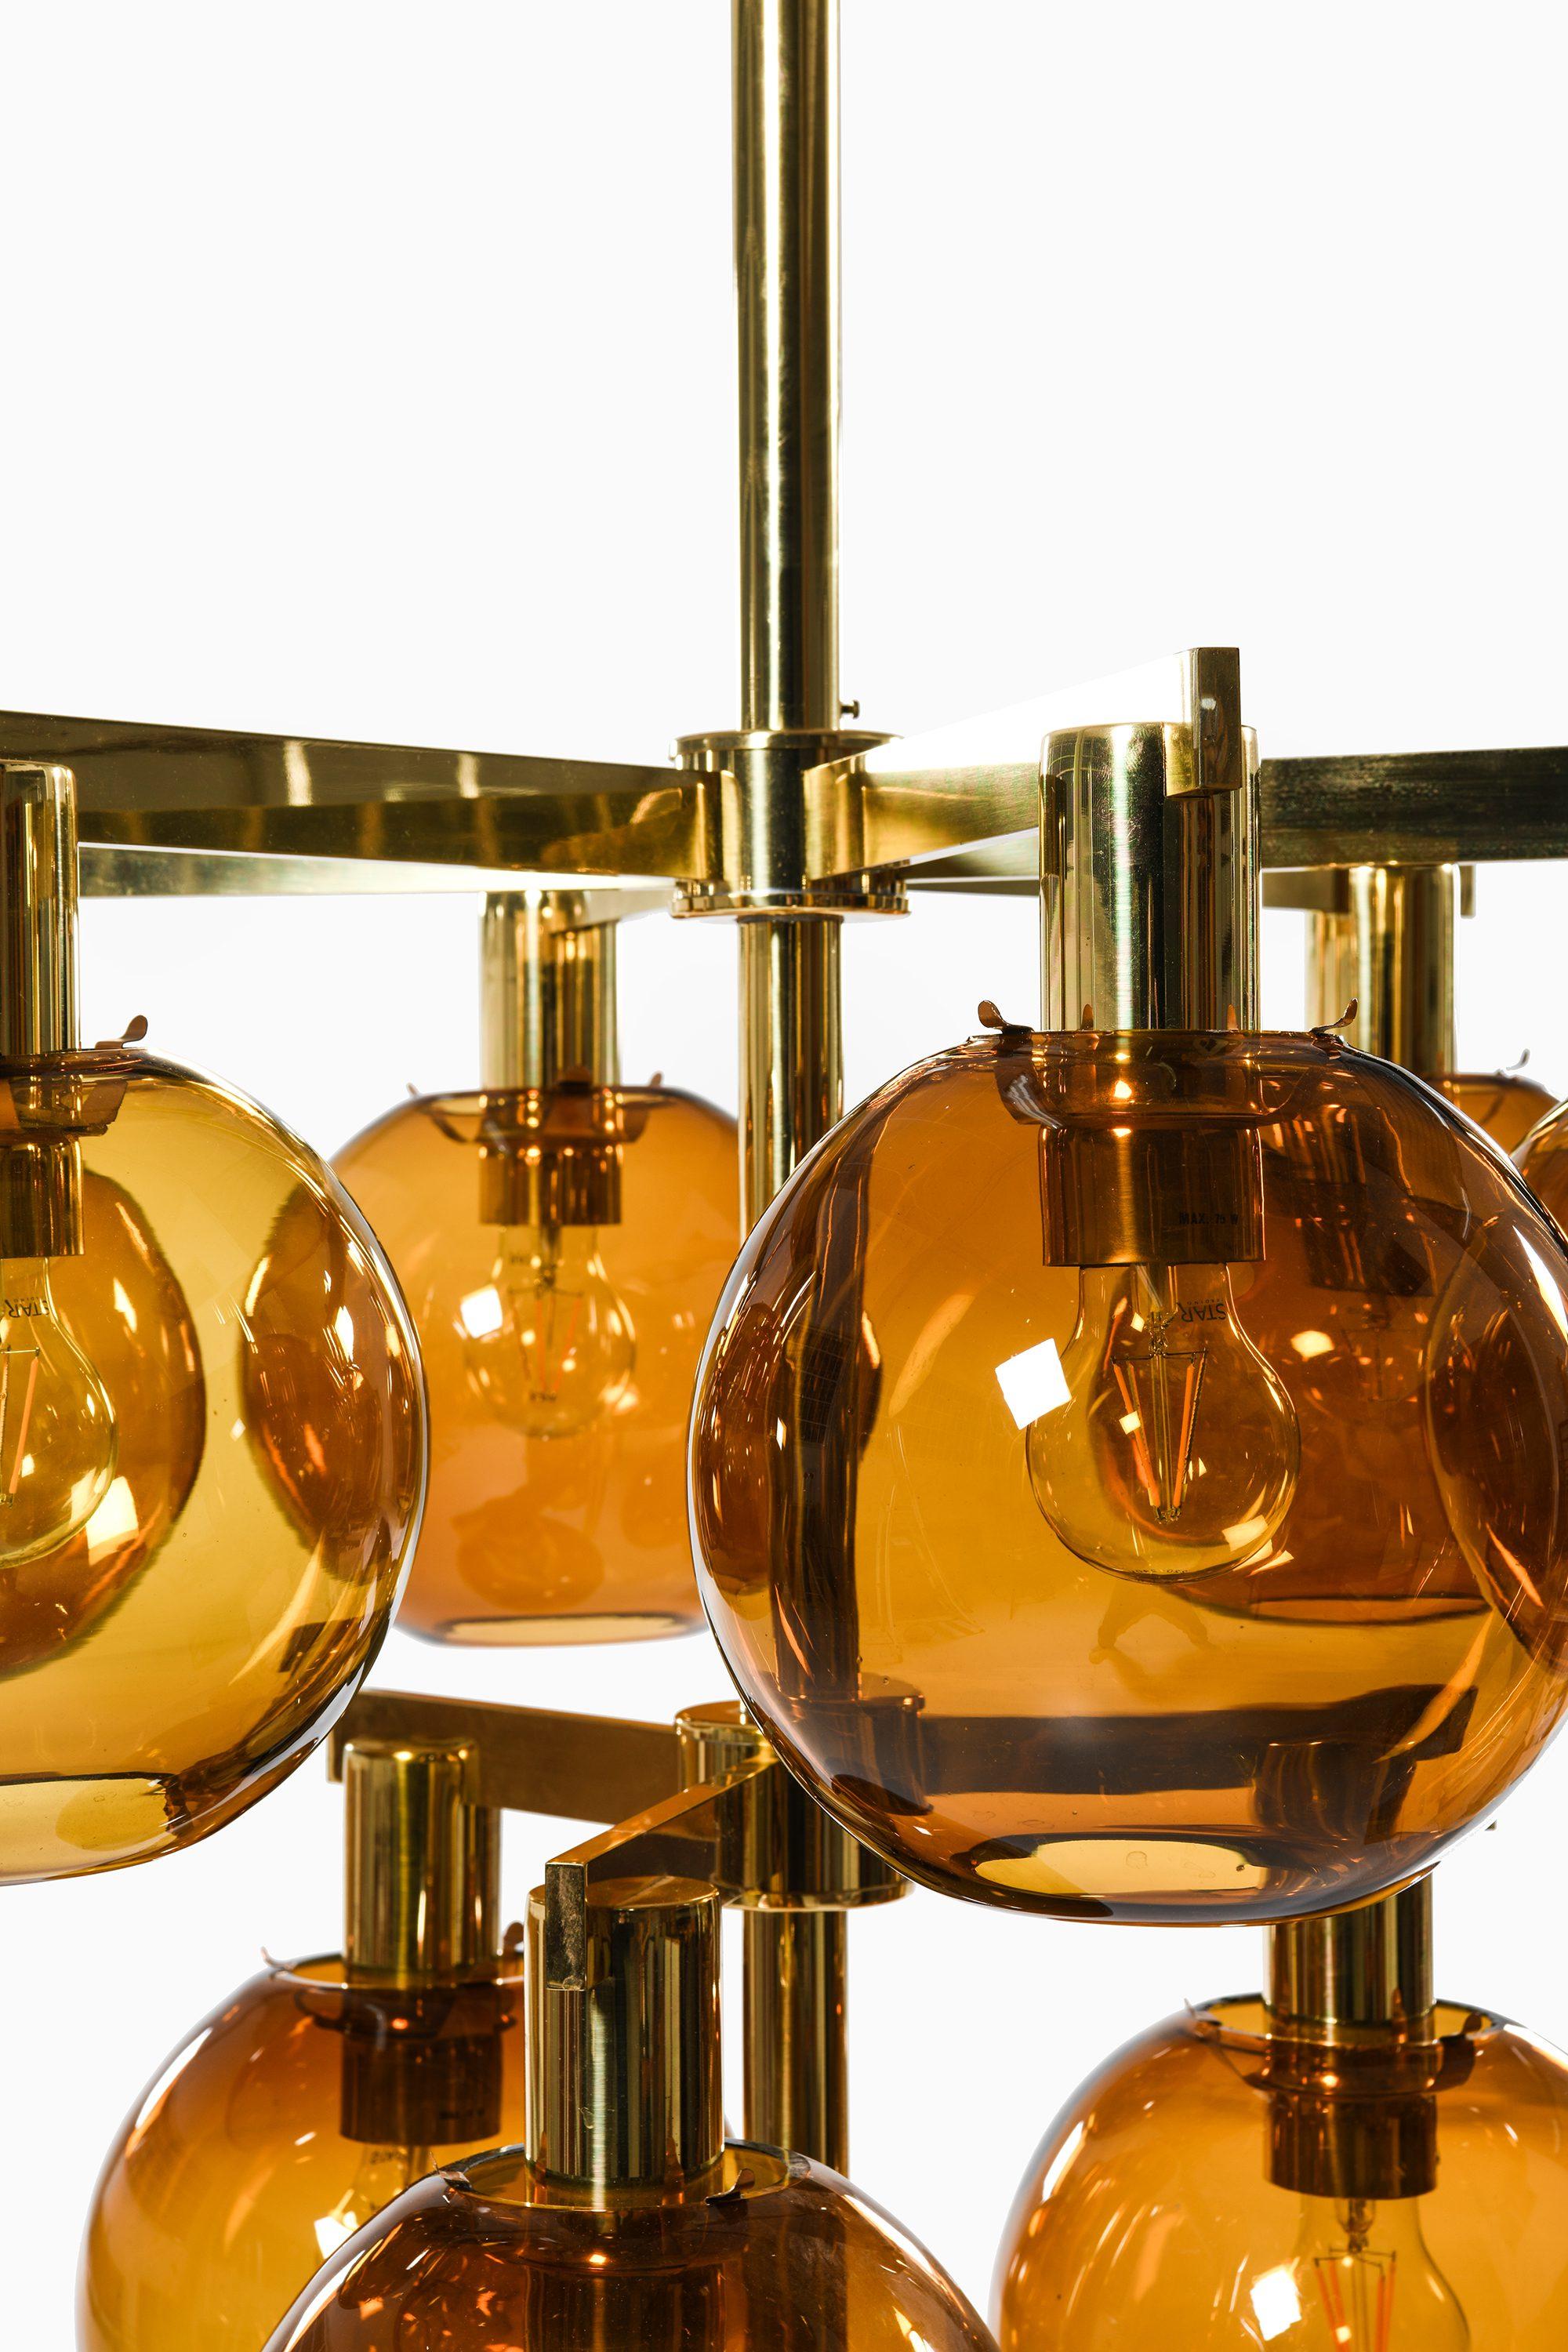 Scandinavian Modern Ceiling Lamp Chandelier in Brass and Amber Glass by Hans-Agne Jakobsson, 1950's For Sale